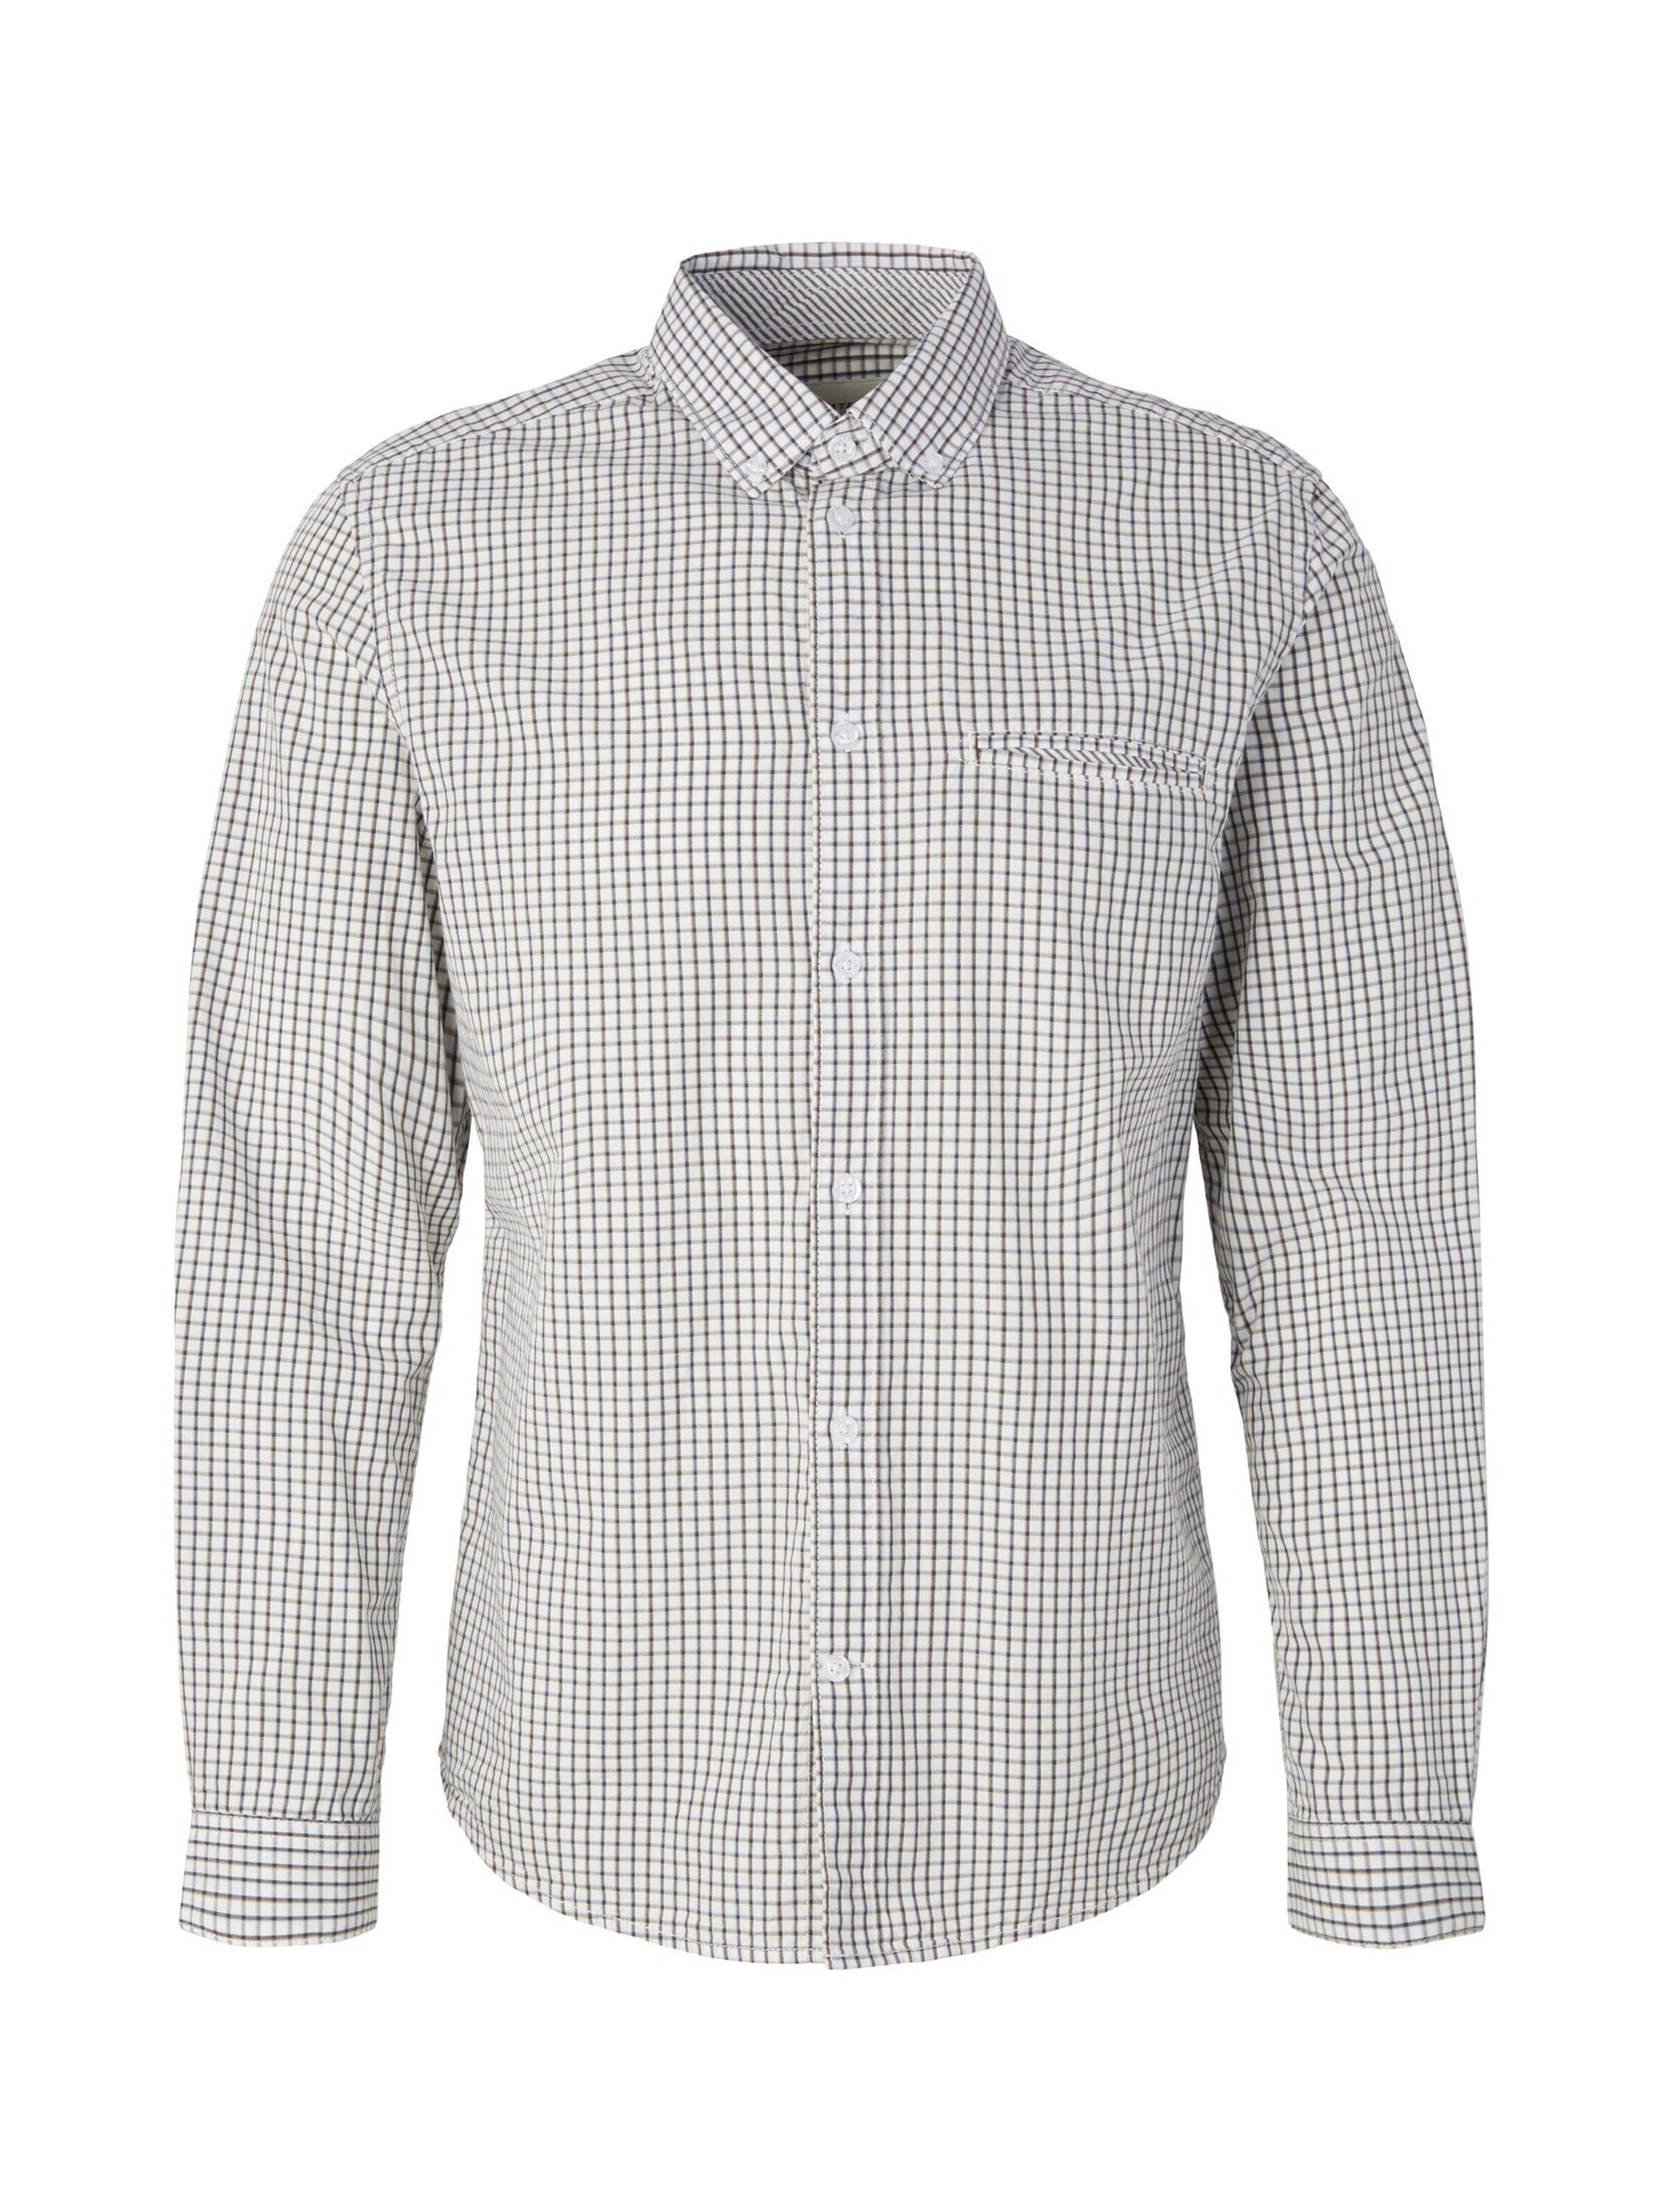 TOM TAILOR Langarmhemd (1-tlg) off white small check